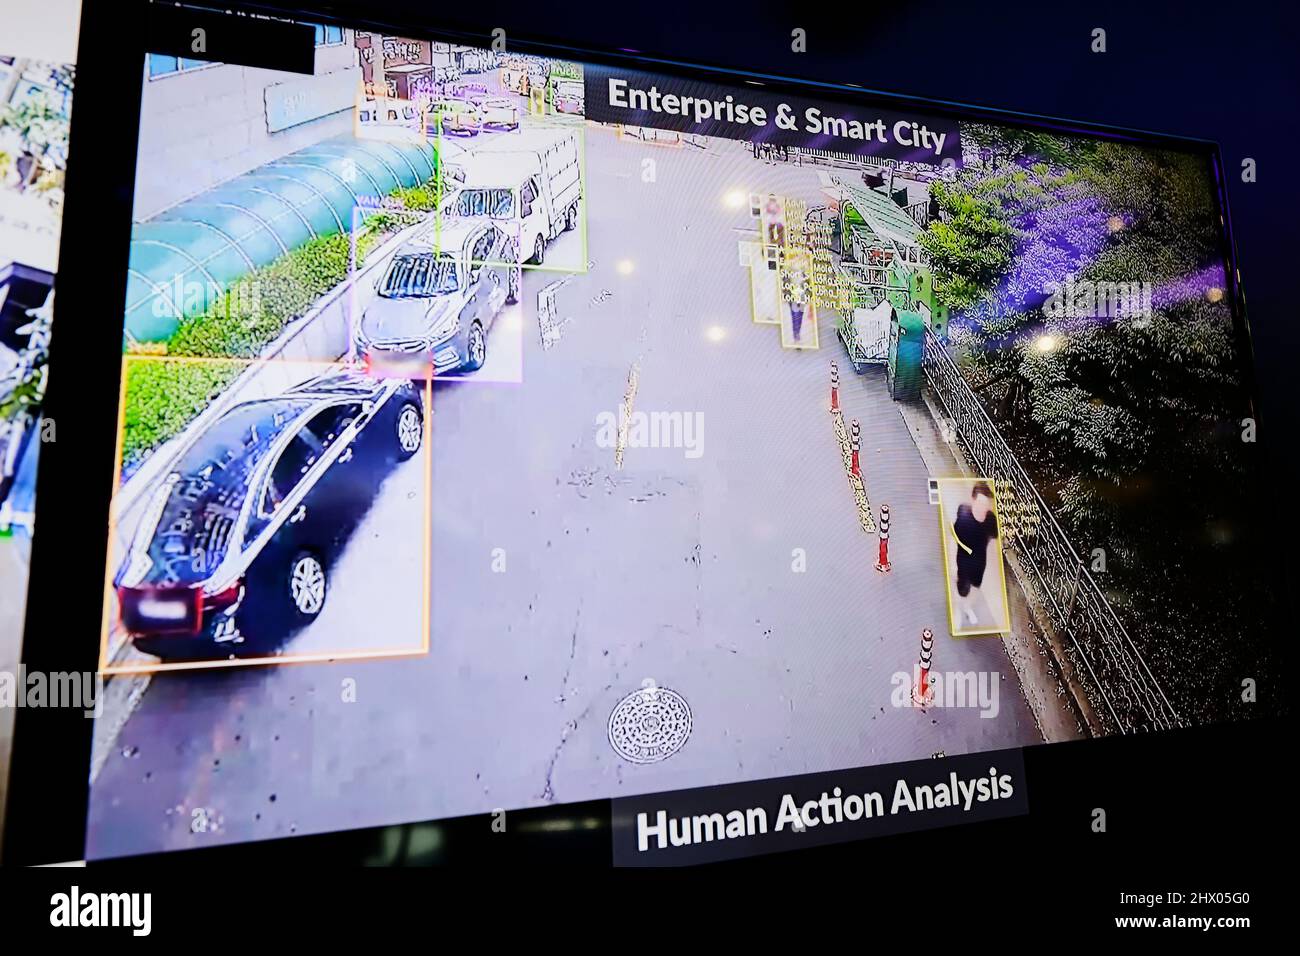 SK telecom demonstrating several uses of AI Camera person detection and  face recognition to prevent accidents, collect data and enhance security.  In the screen we can see how the software recognises different